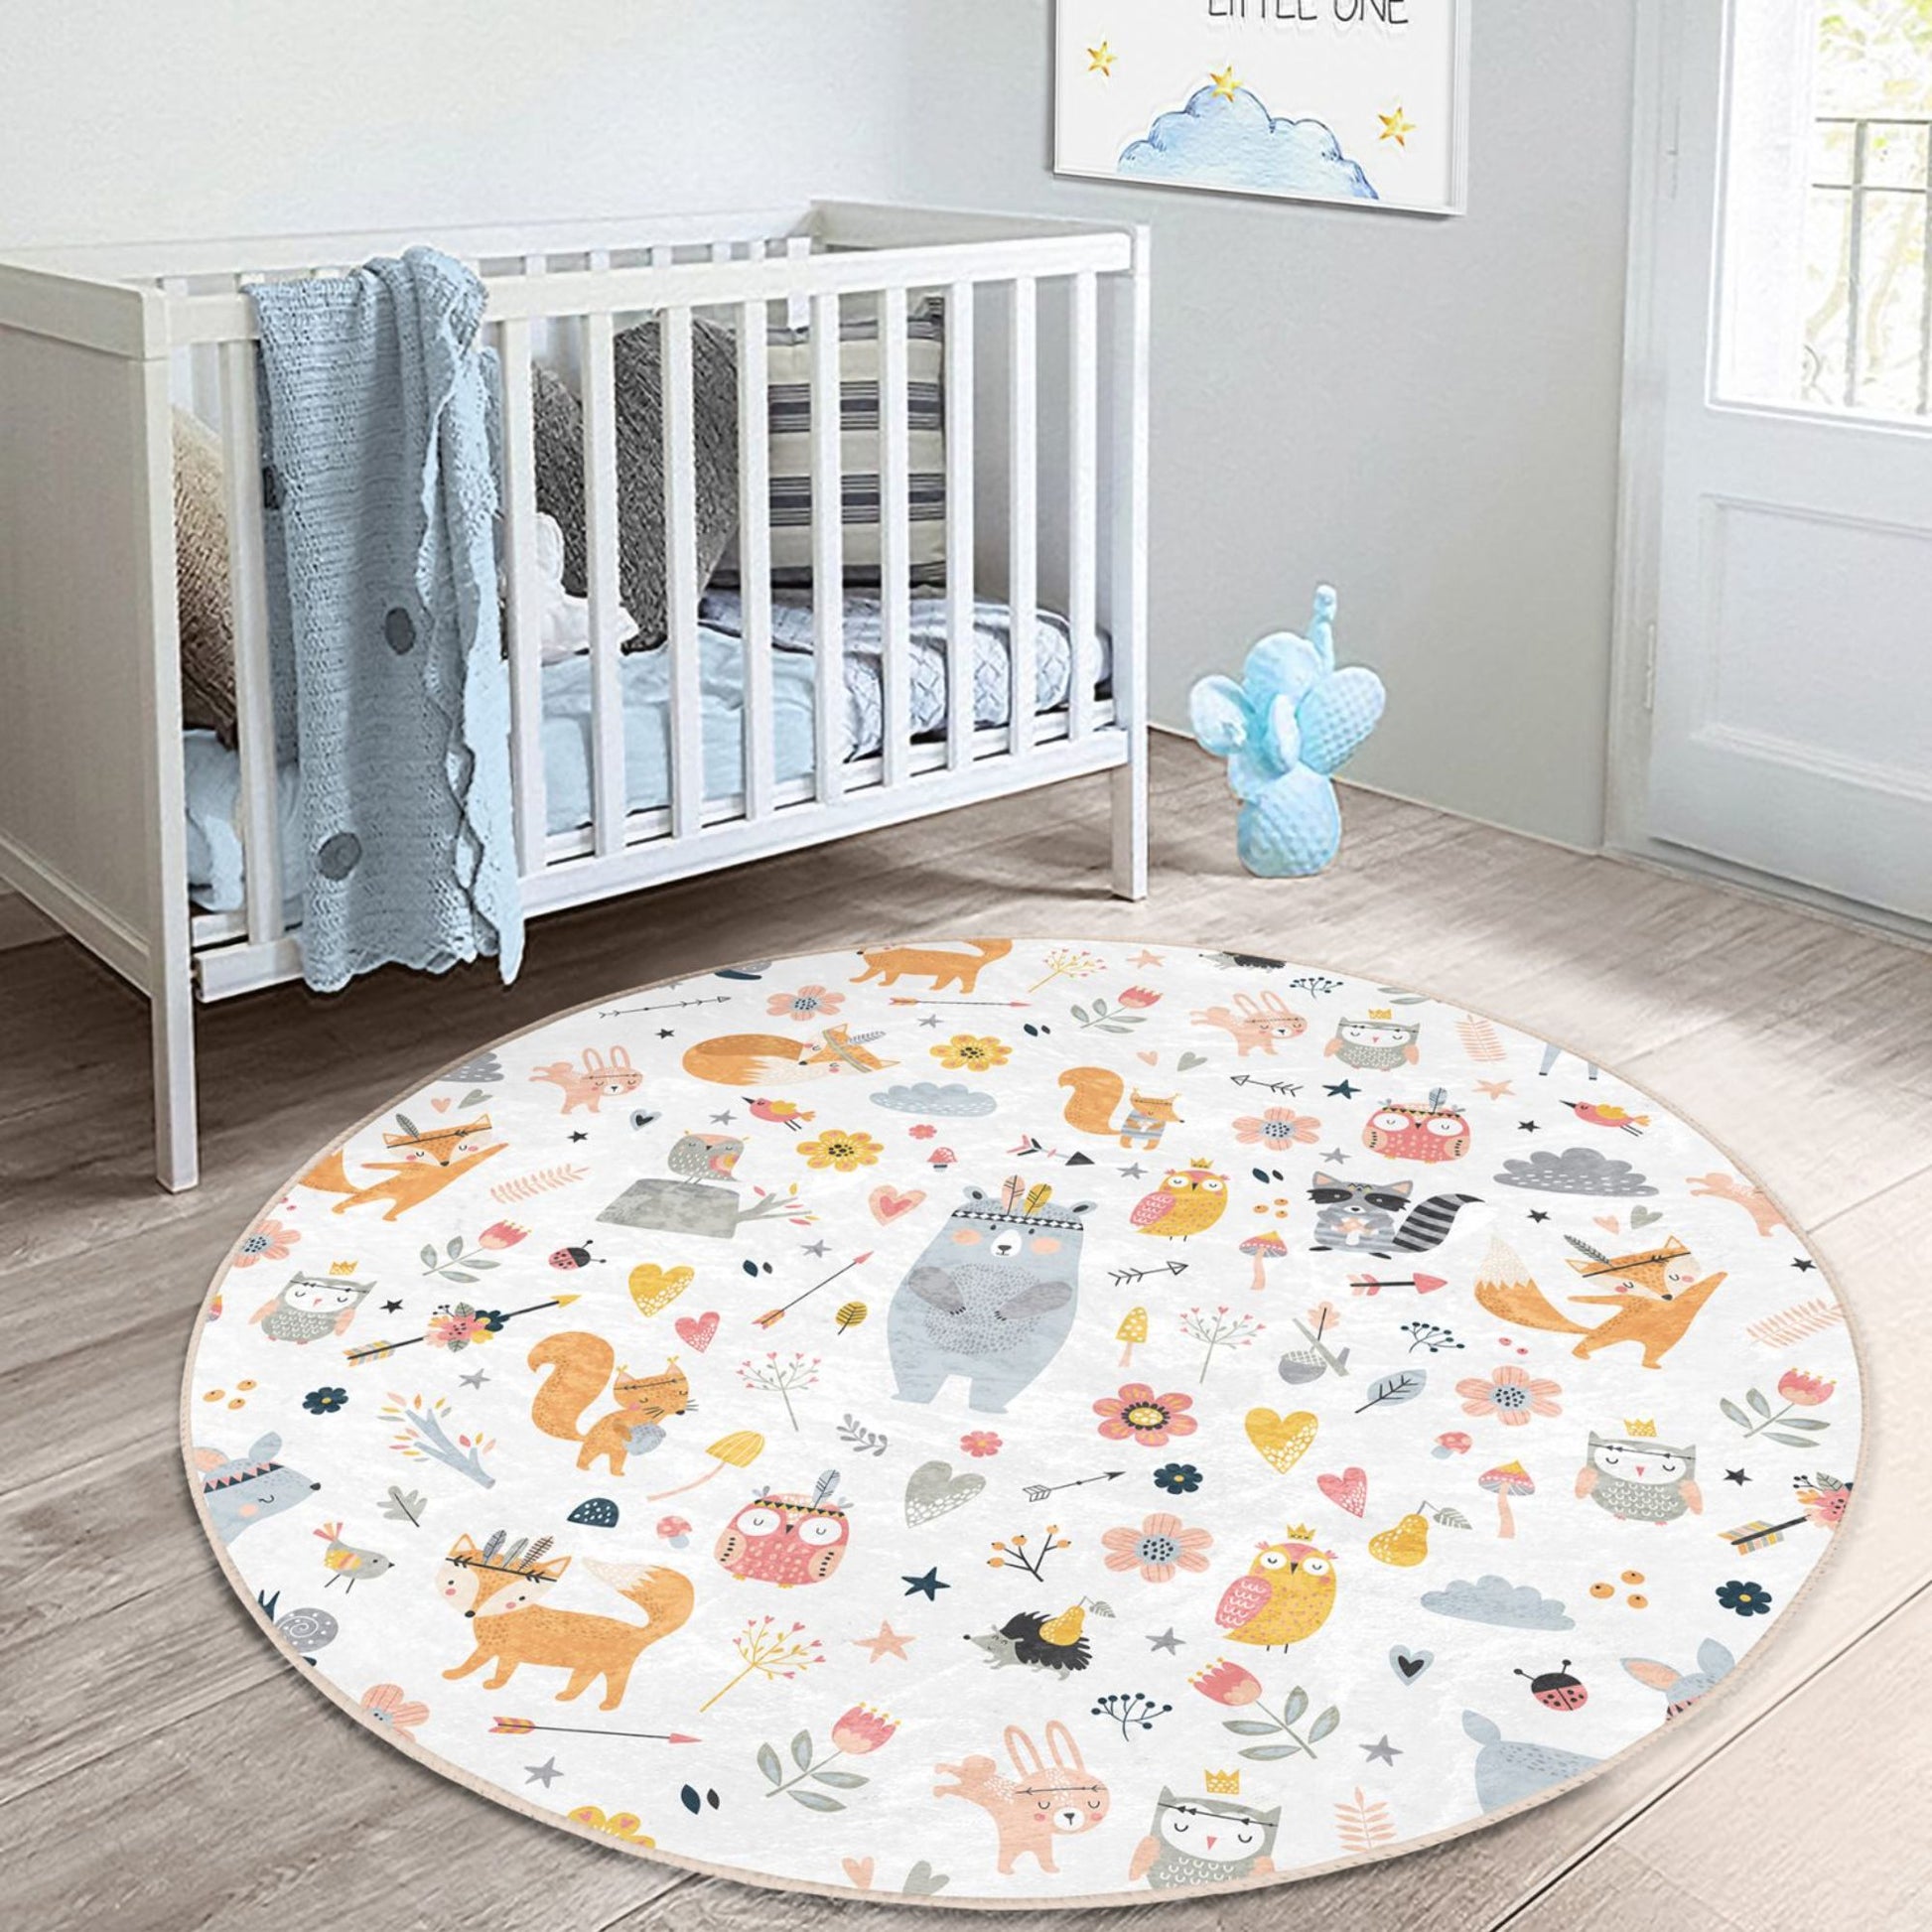 Homeezone Kids Rug - Bring the Forest to Your Child's Room